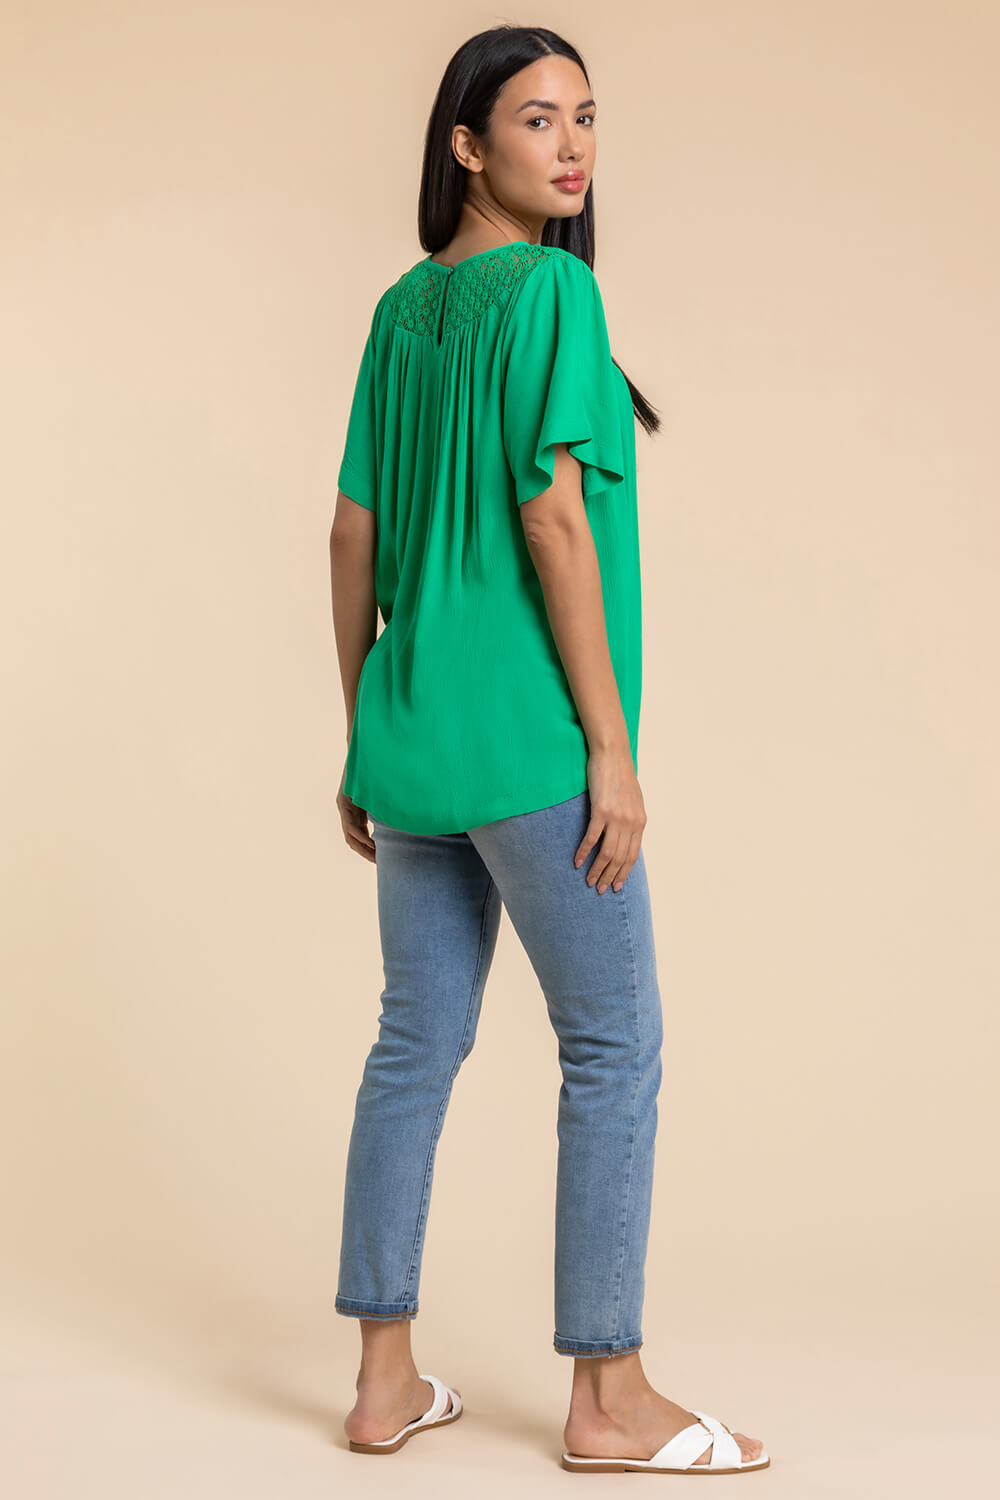 Green Lace Panel Tunic Top, Image 2 of 5